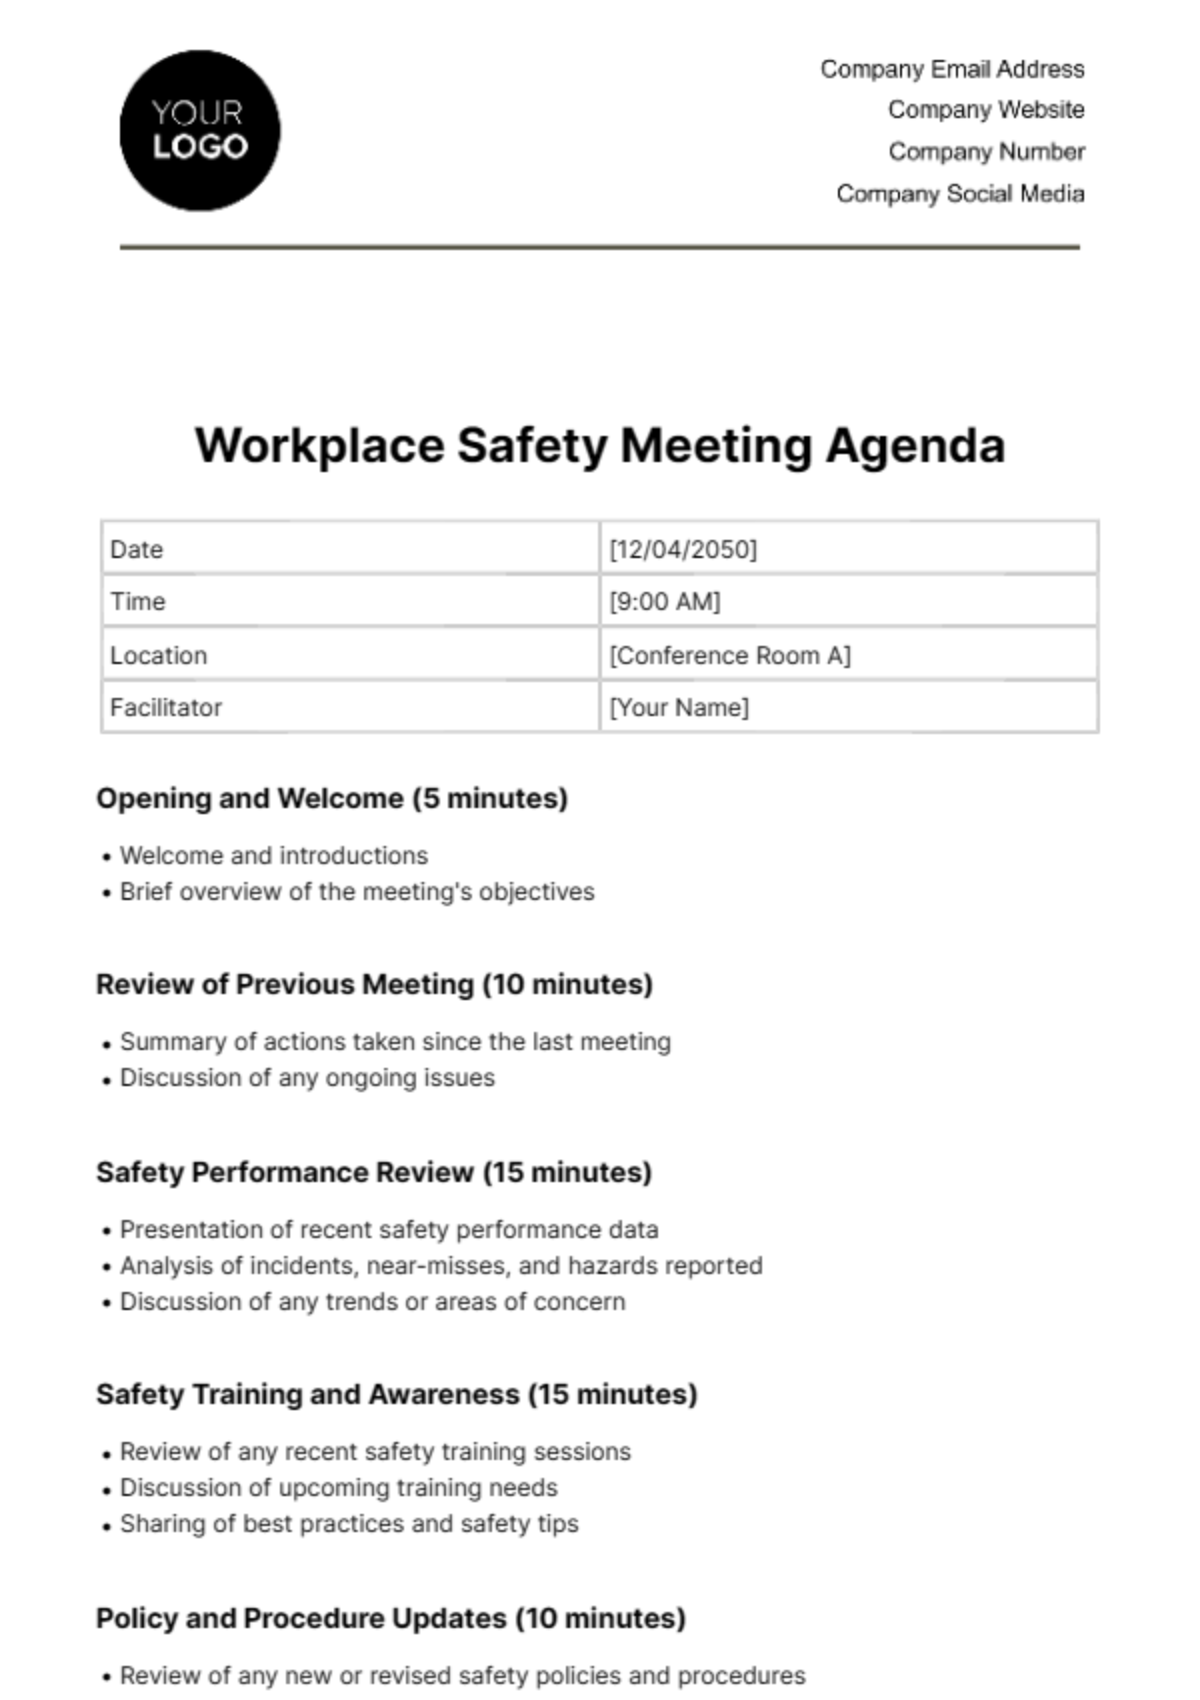 Workplace Safety Meeting Agenda Template